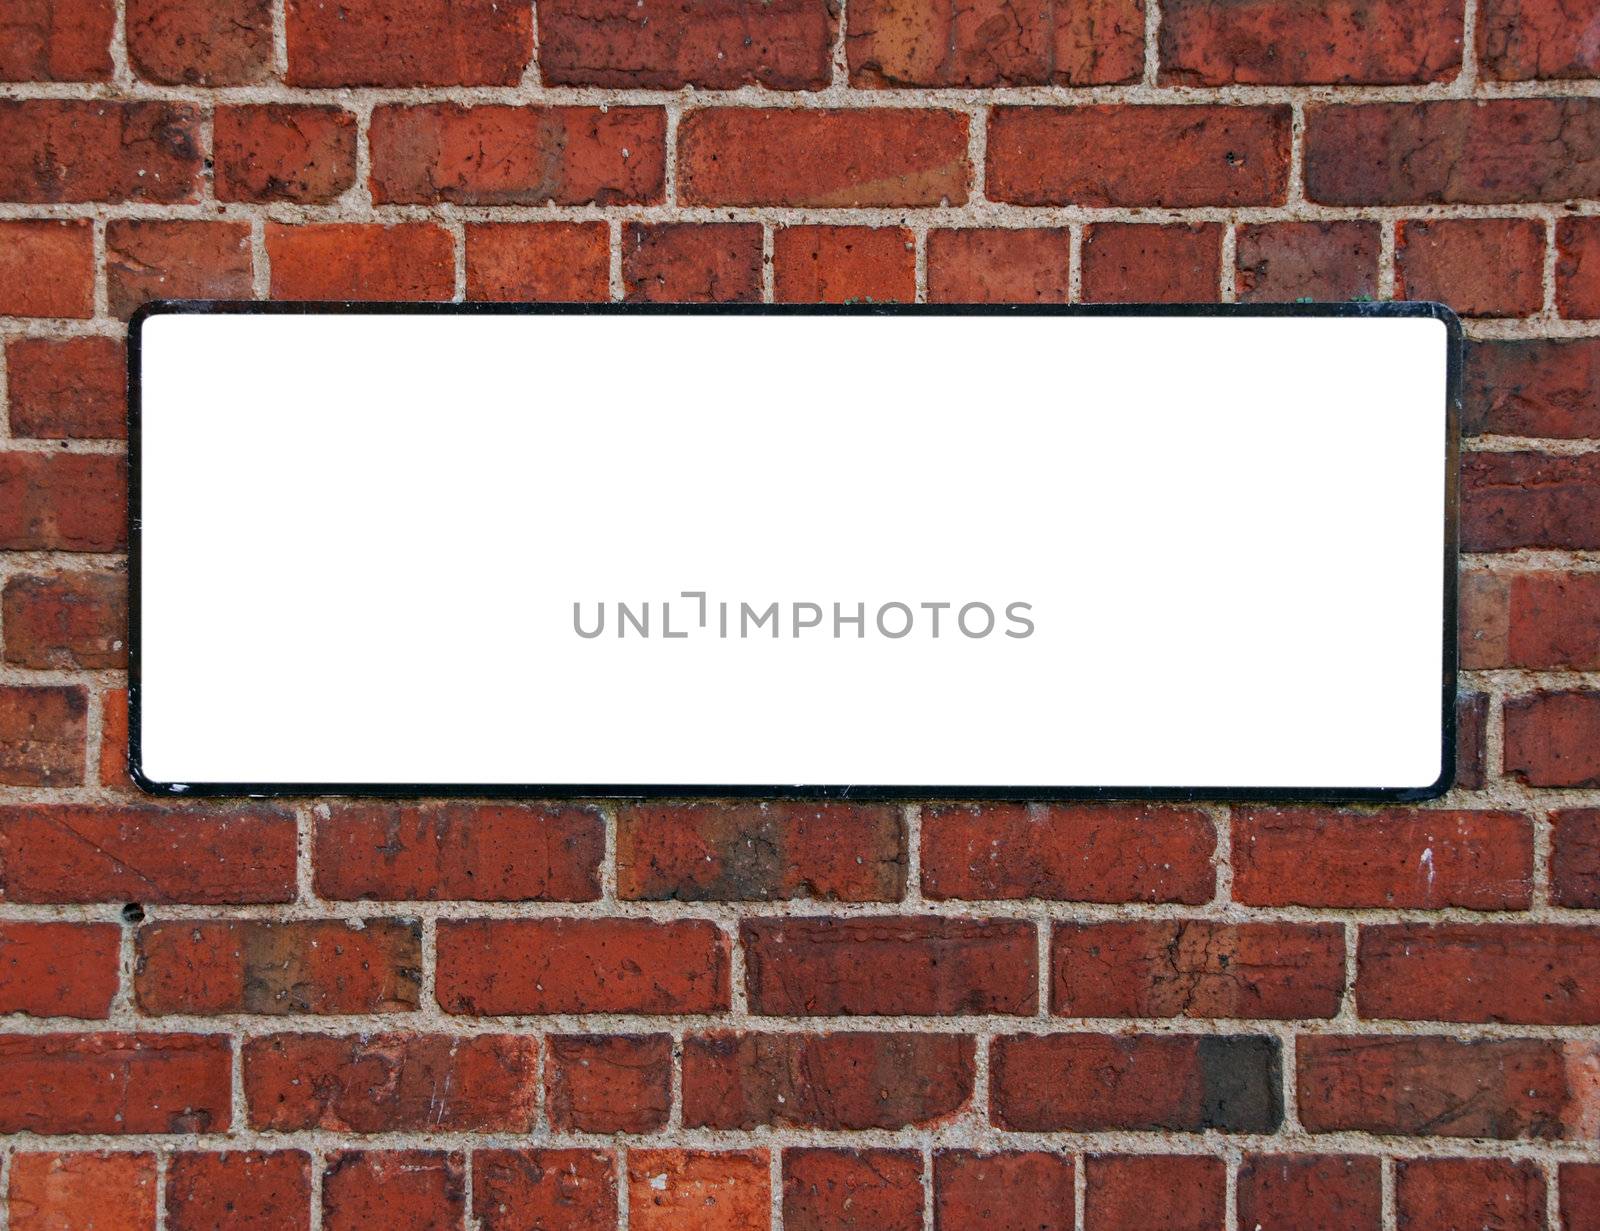 Sign on a brick wall by luissantos84